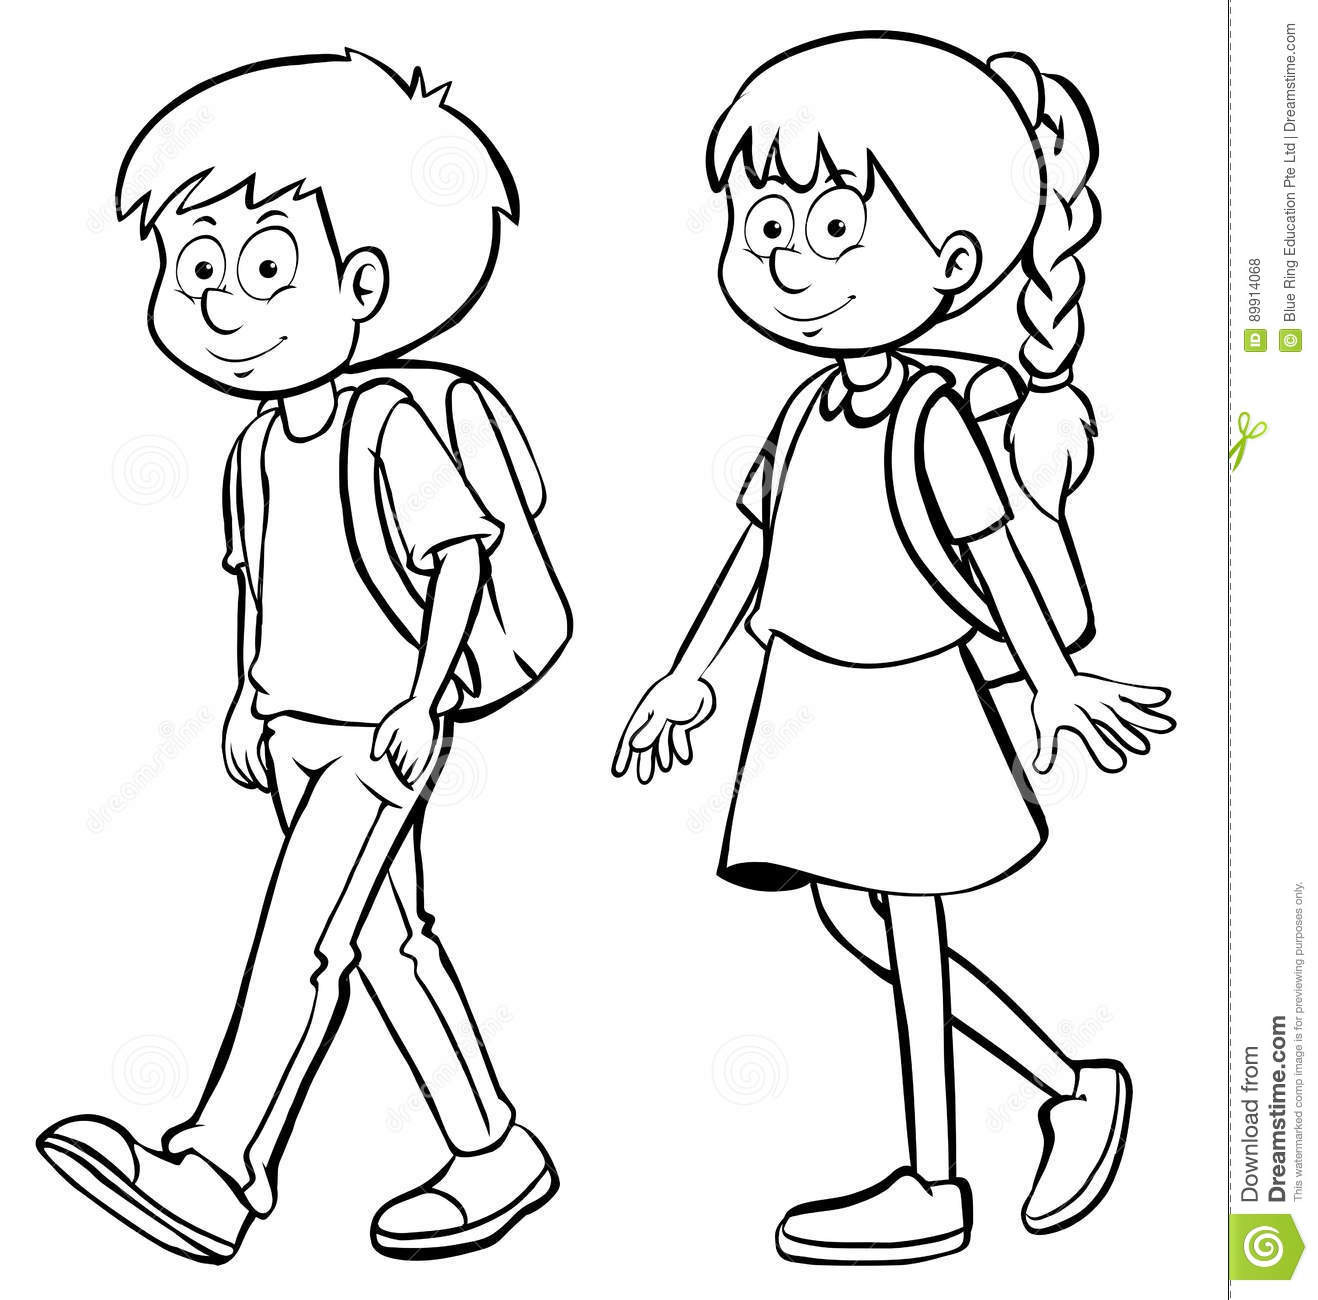 Girls And Boys Coloring Pages
 Human Outline For Boy And Girl Stock Illustration